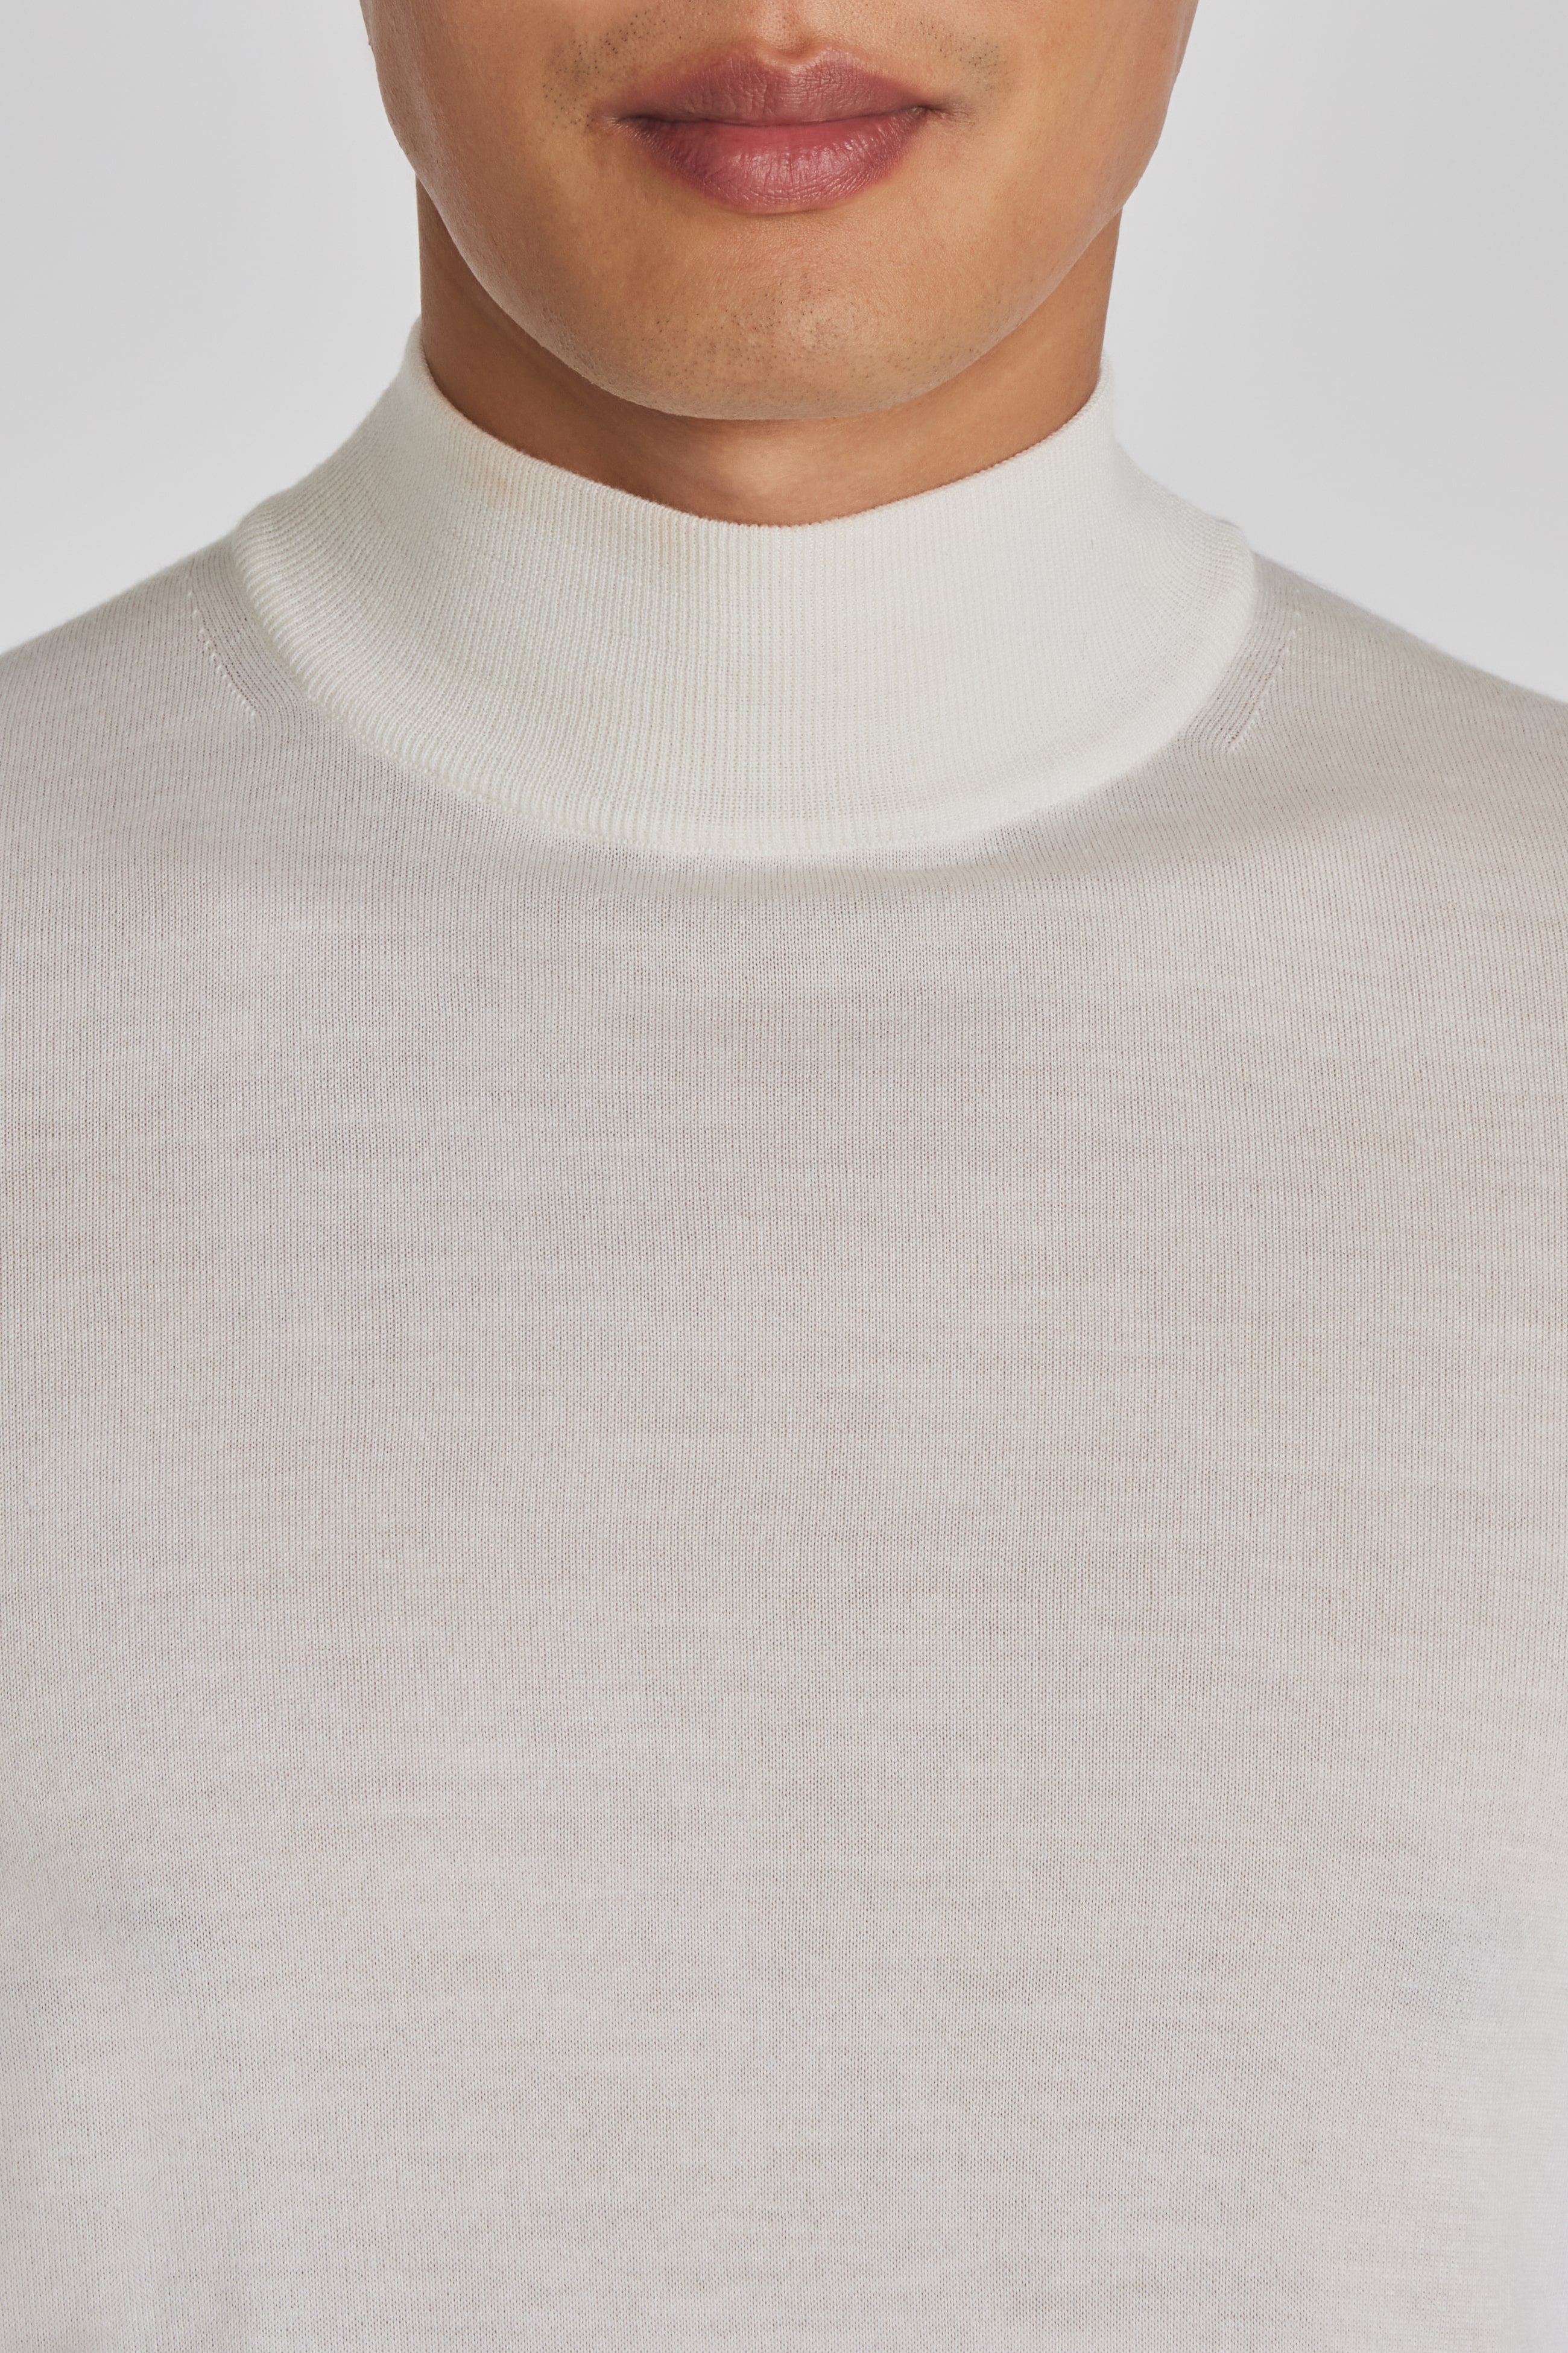 Alt view 1 Beaudry Ecru Wool, Silk and Cashmere Mock Neck Sweater